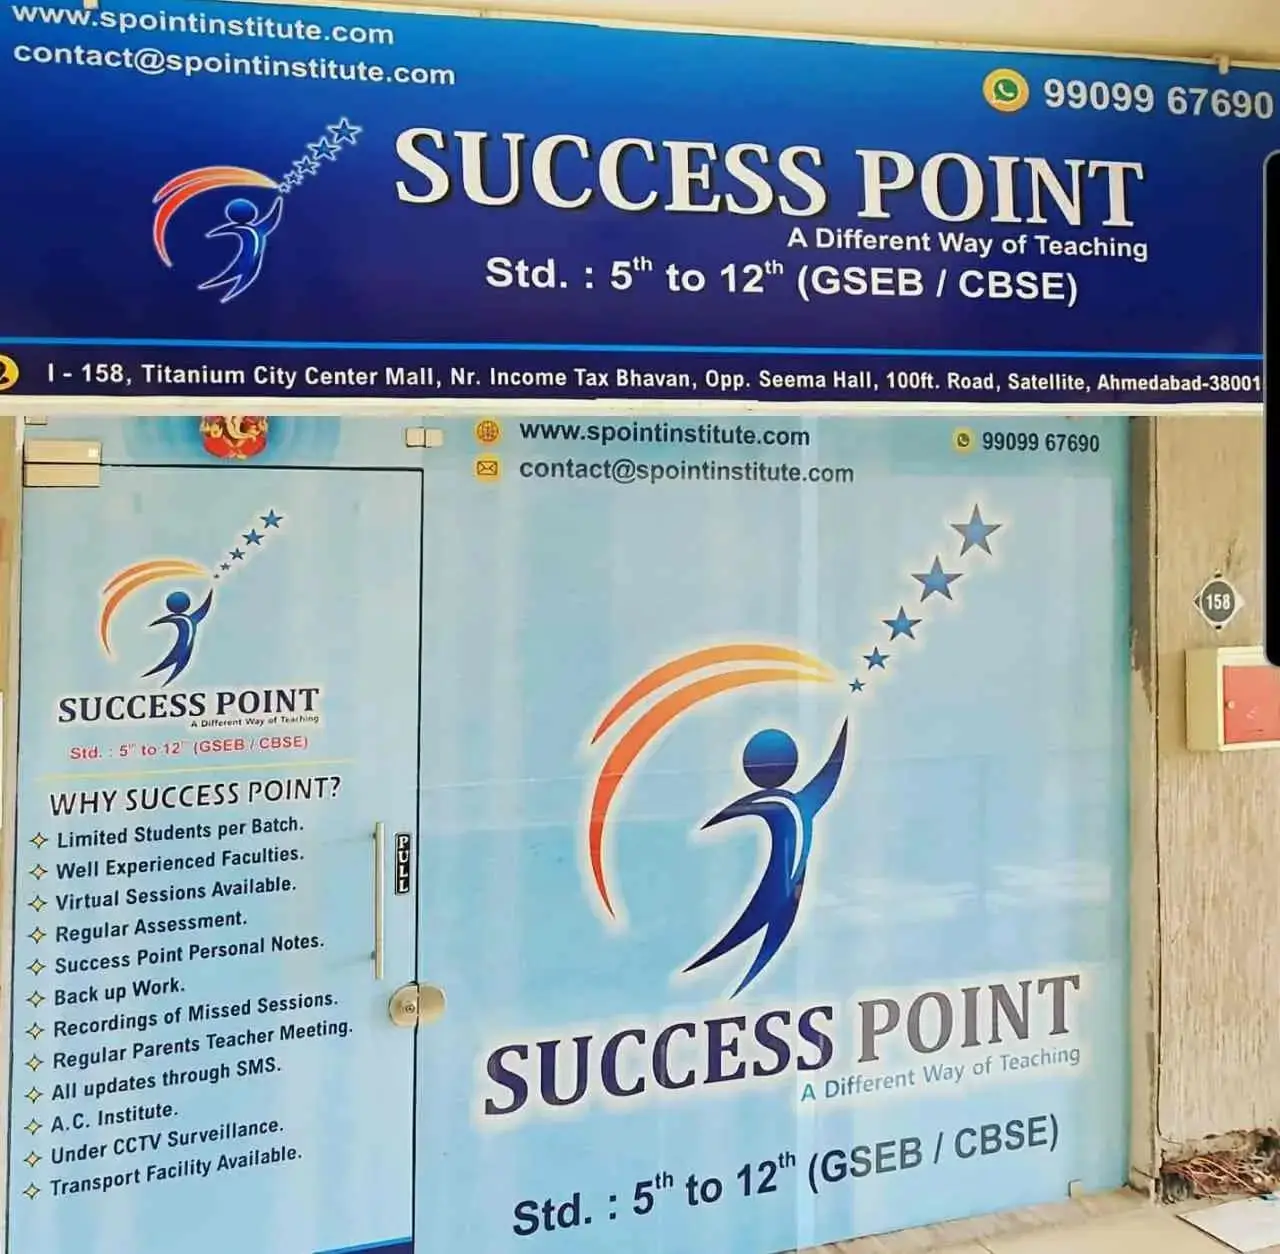 Succes point Office 